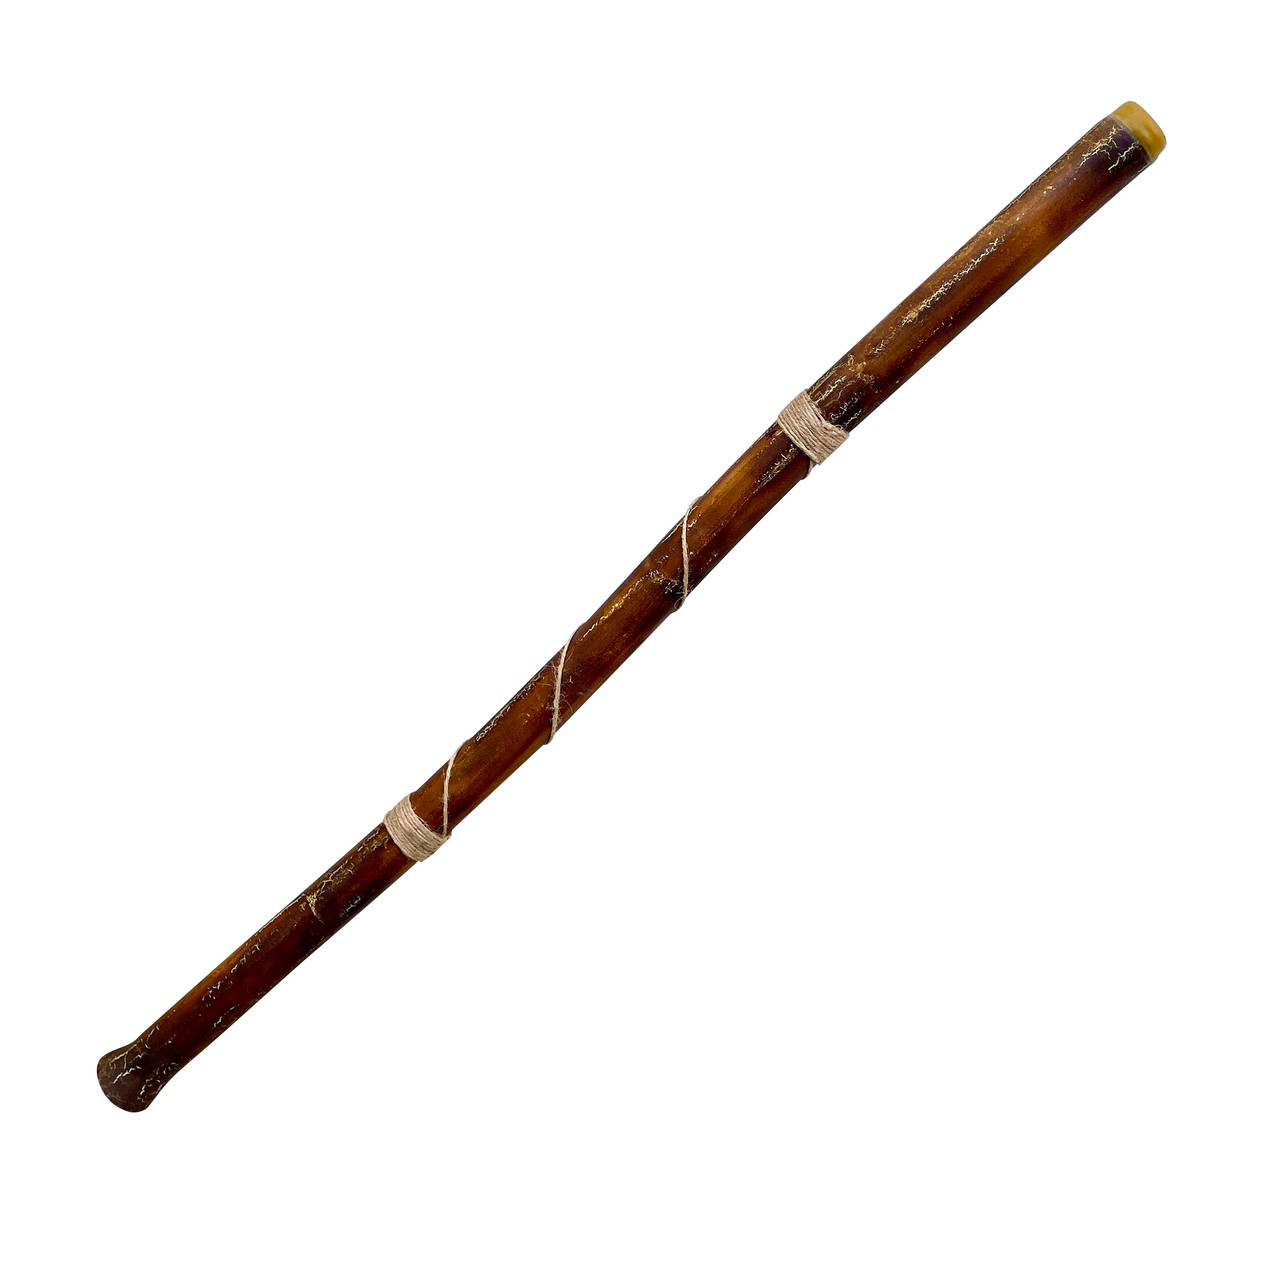 Hand-fired Modern Didgeridoo - Beeswax Mouthpiece - Easy Player! - Key of D